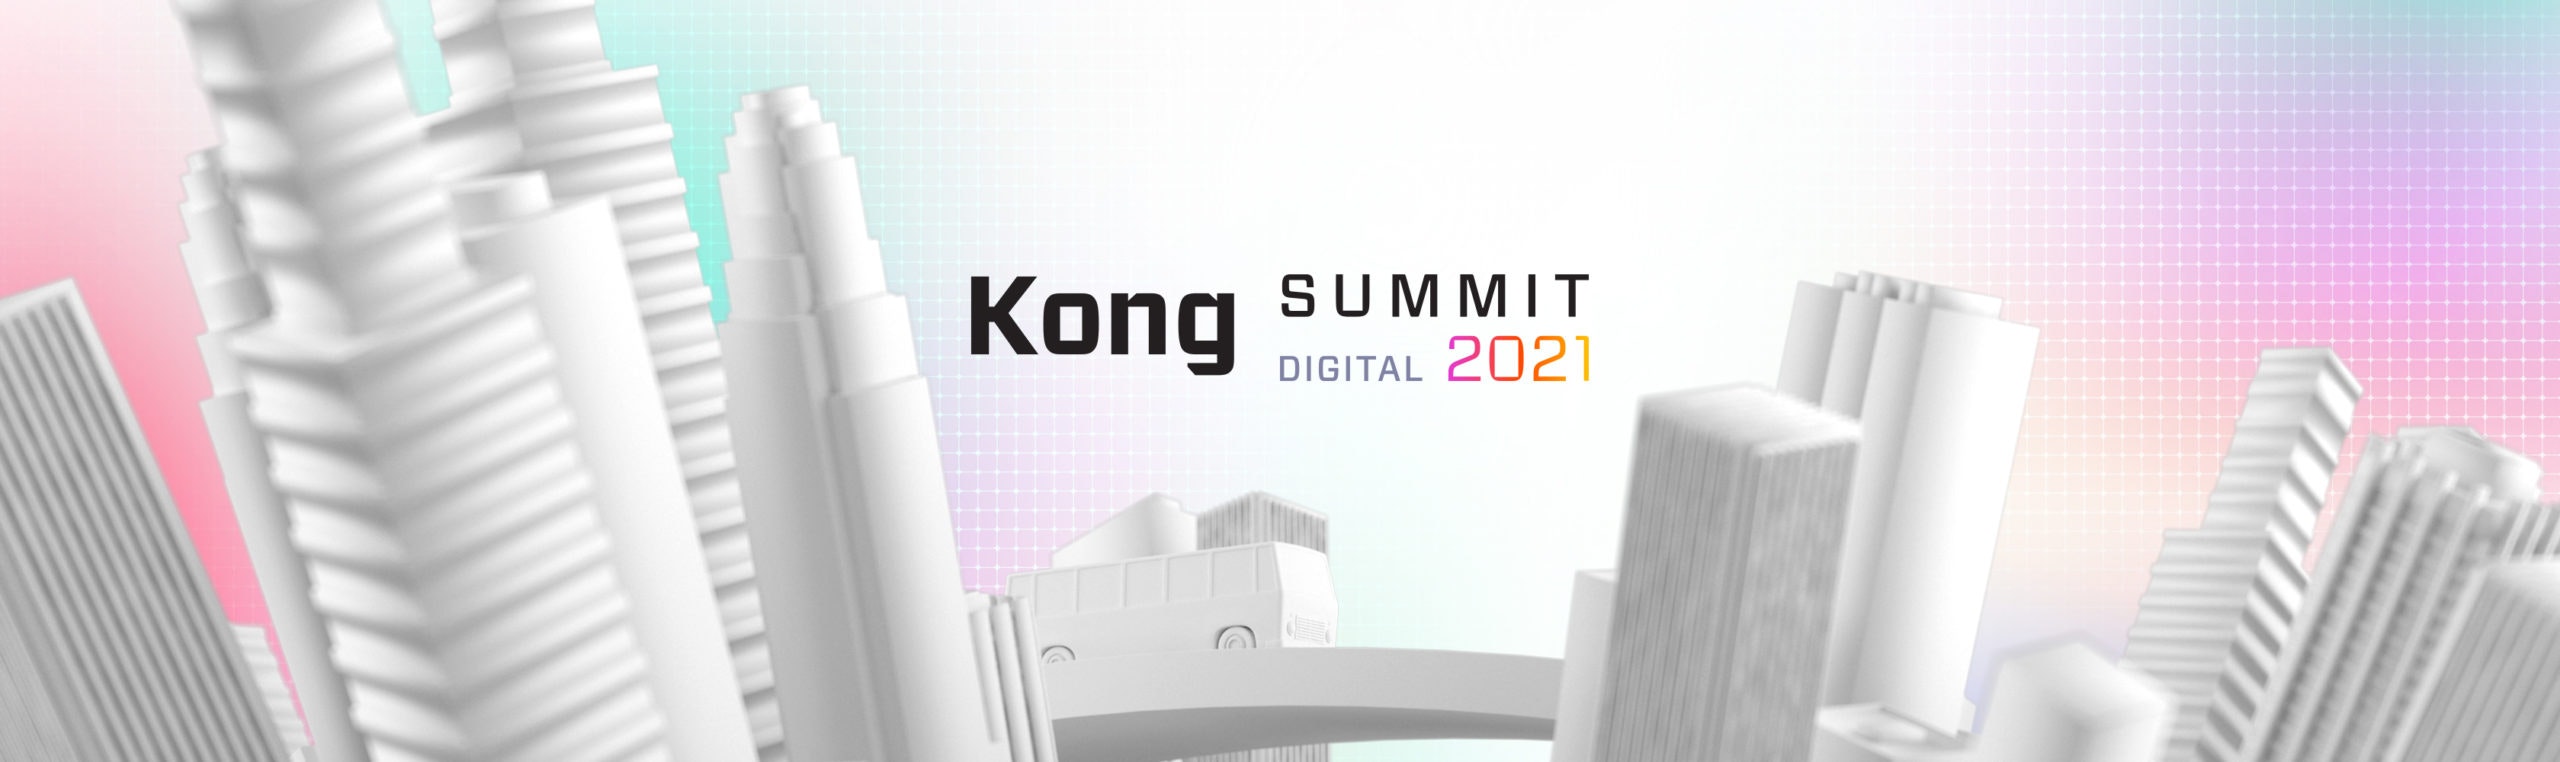 Why Should You Attend Kong Summit 2021?